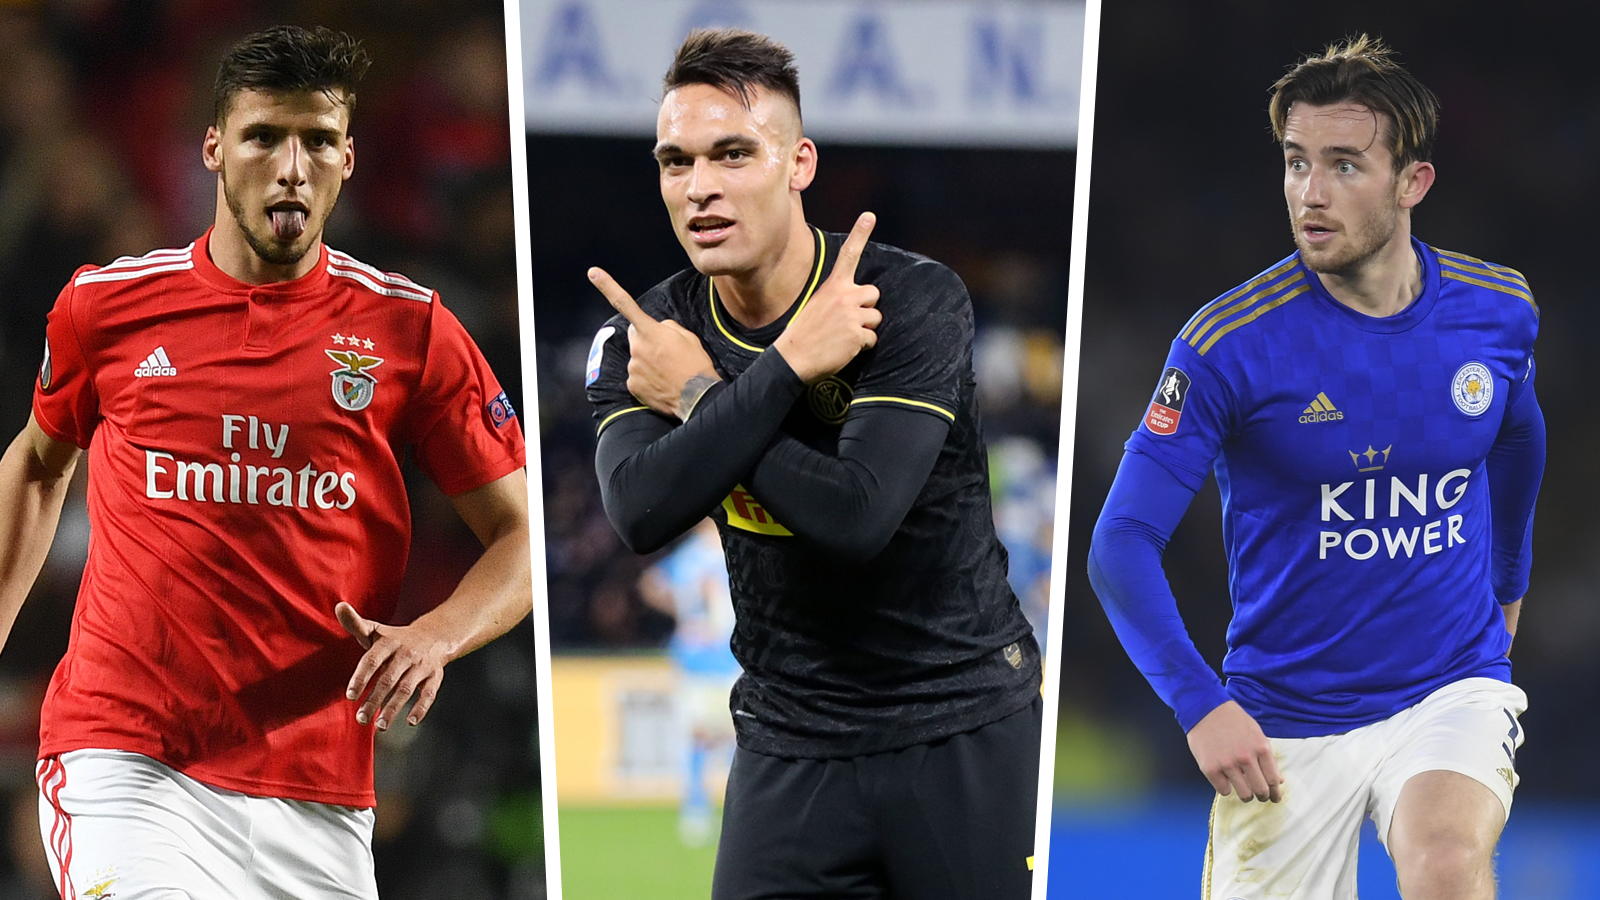 Man City transfer targets Dias, Chilwell, Lautaro and players linked with the club Goal